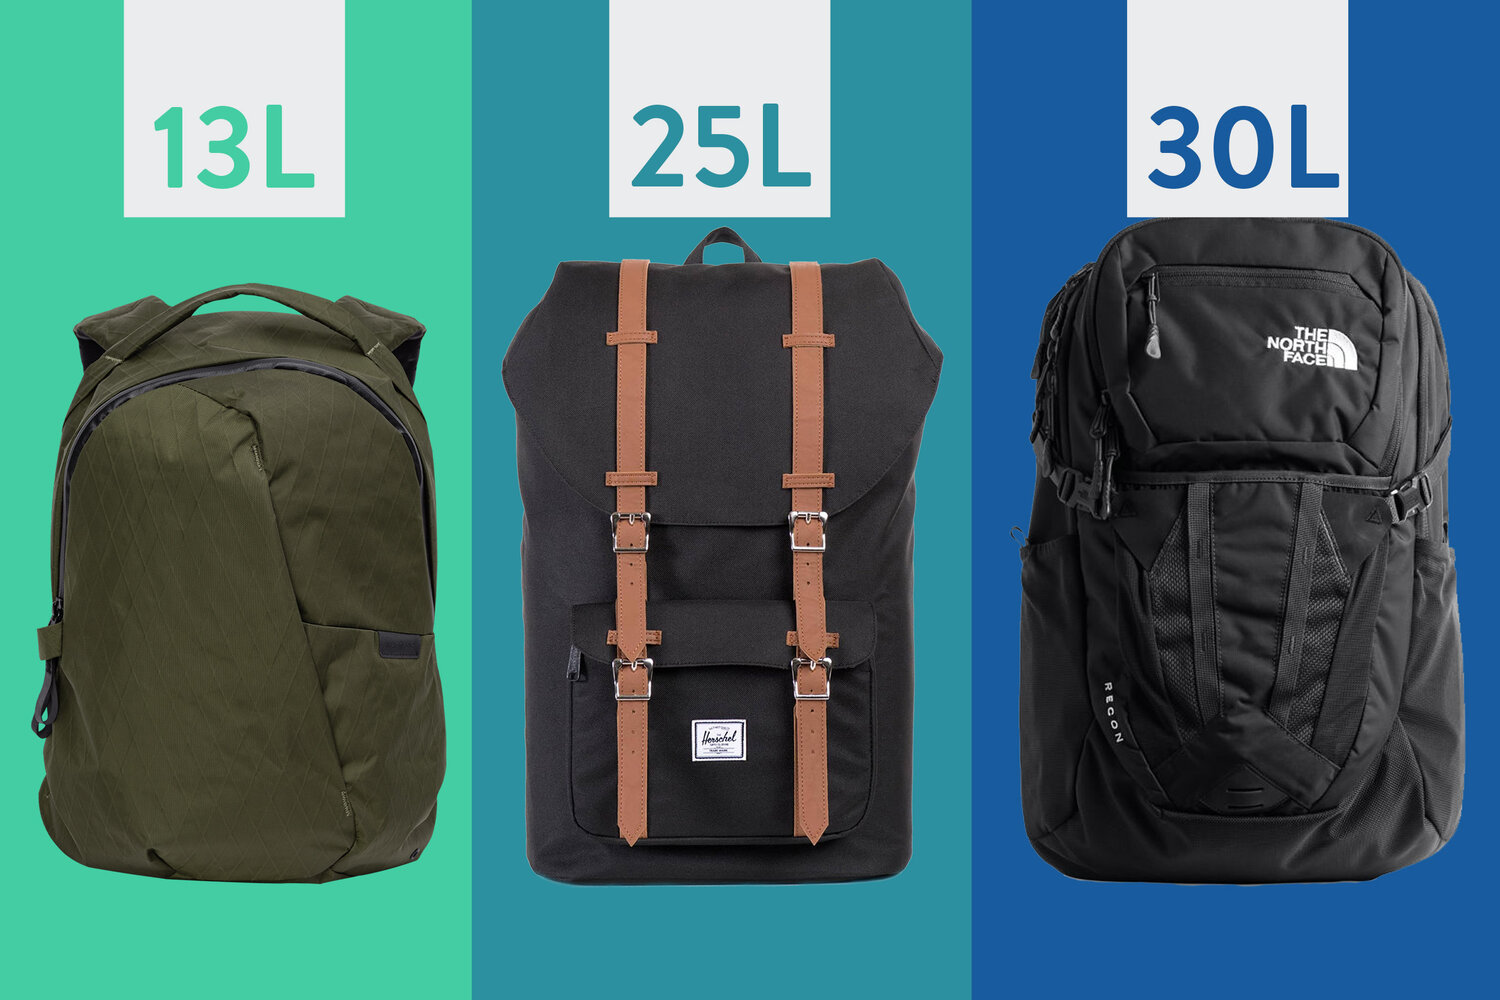 how big is a 20l backpack - Benefits of Using a 20L Backpack